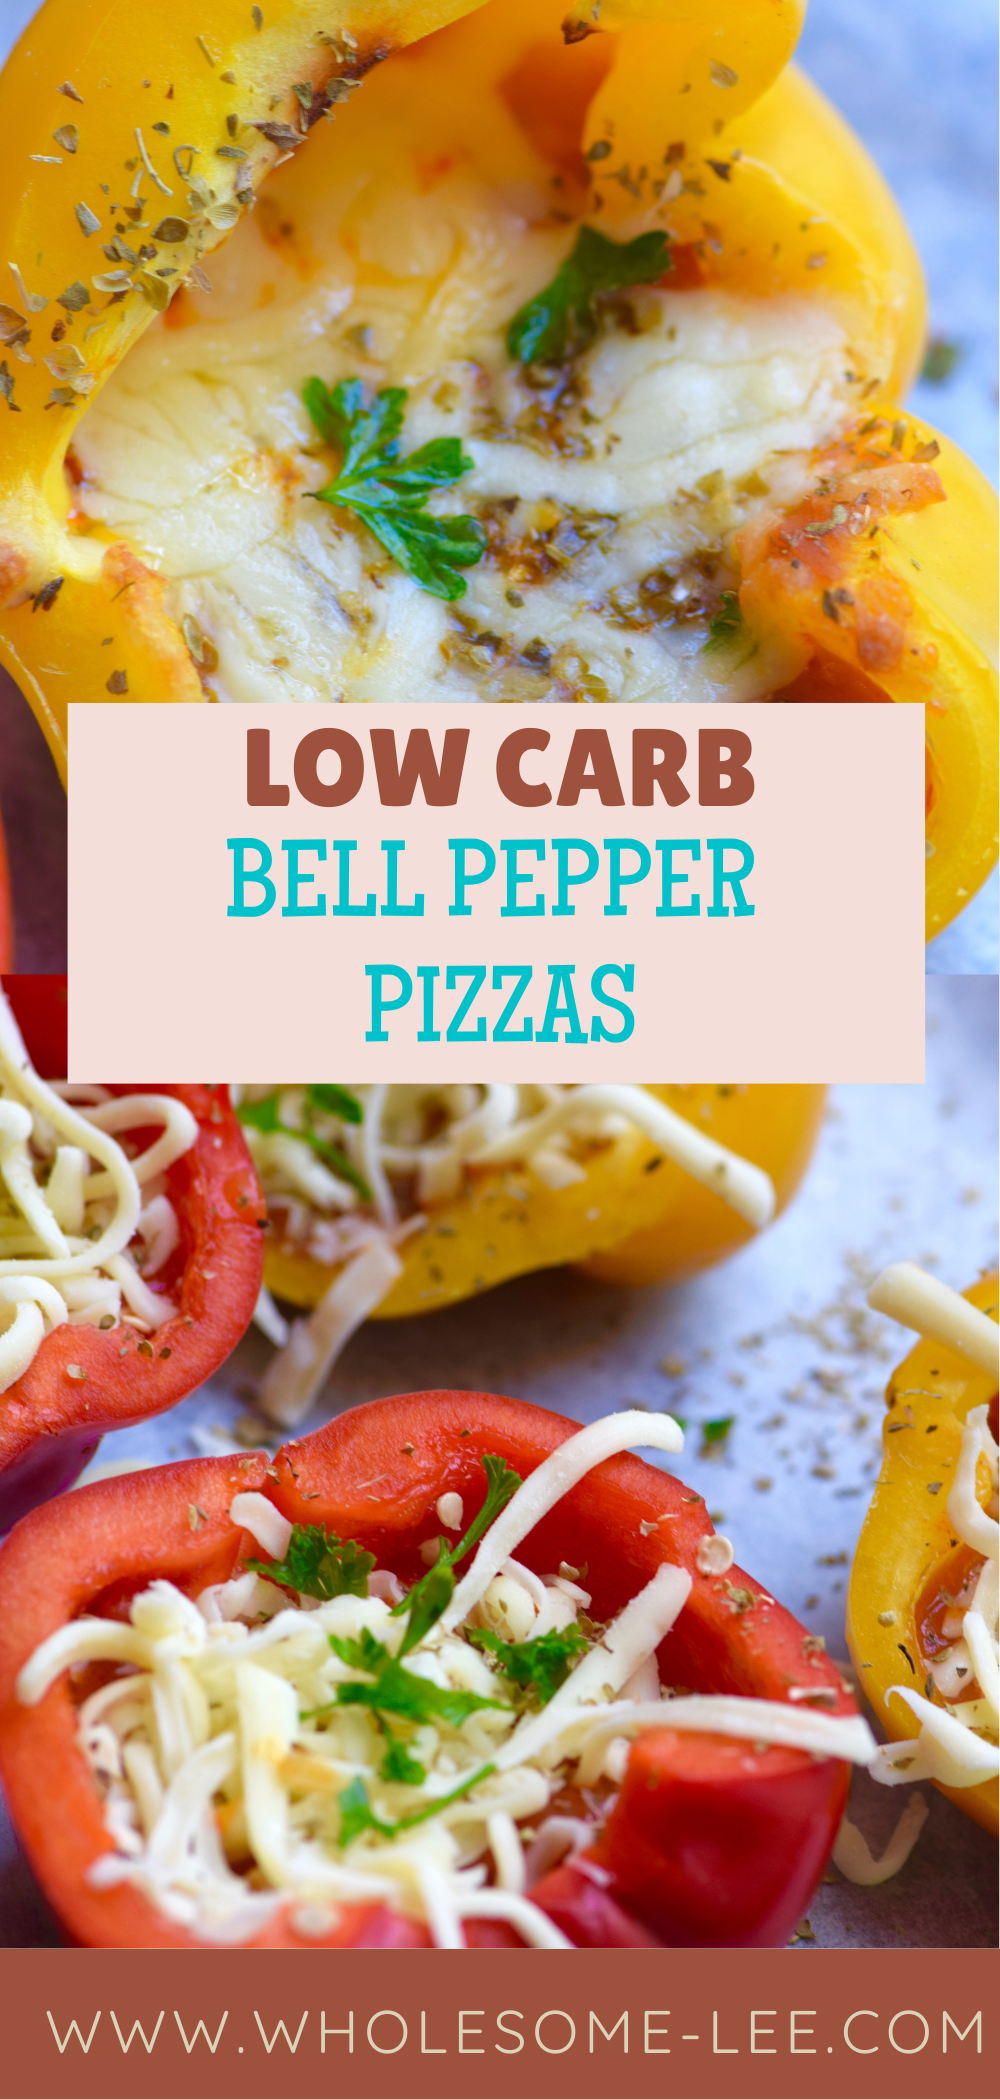 Low Carb Bell pepper pizzas